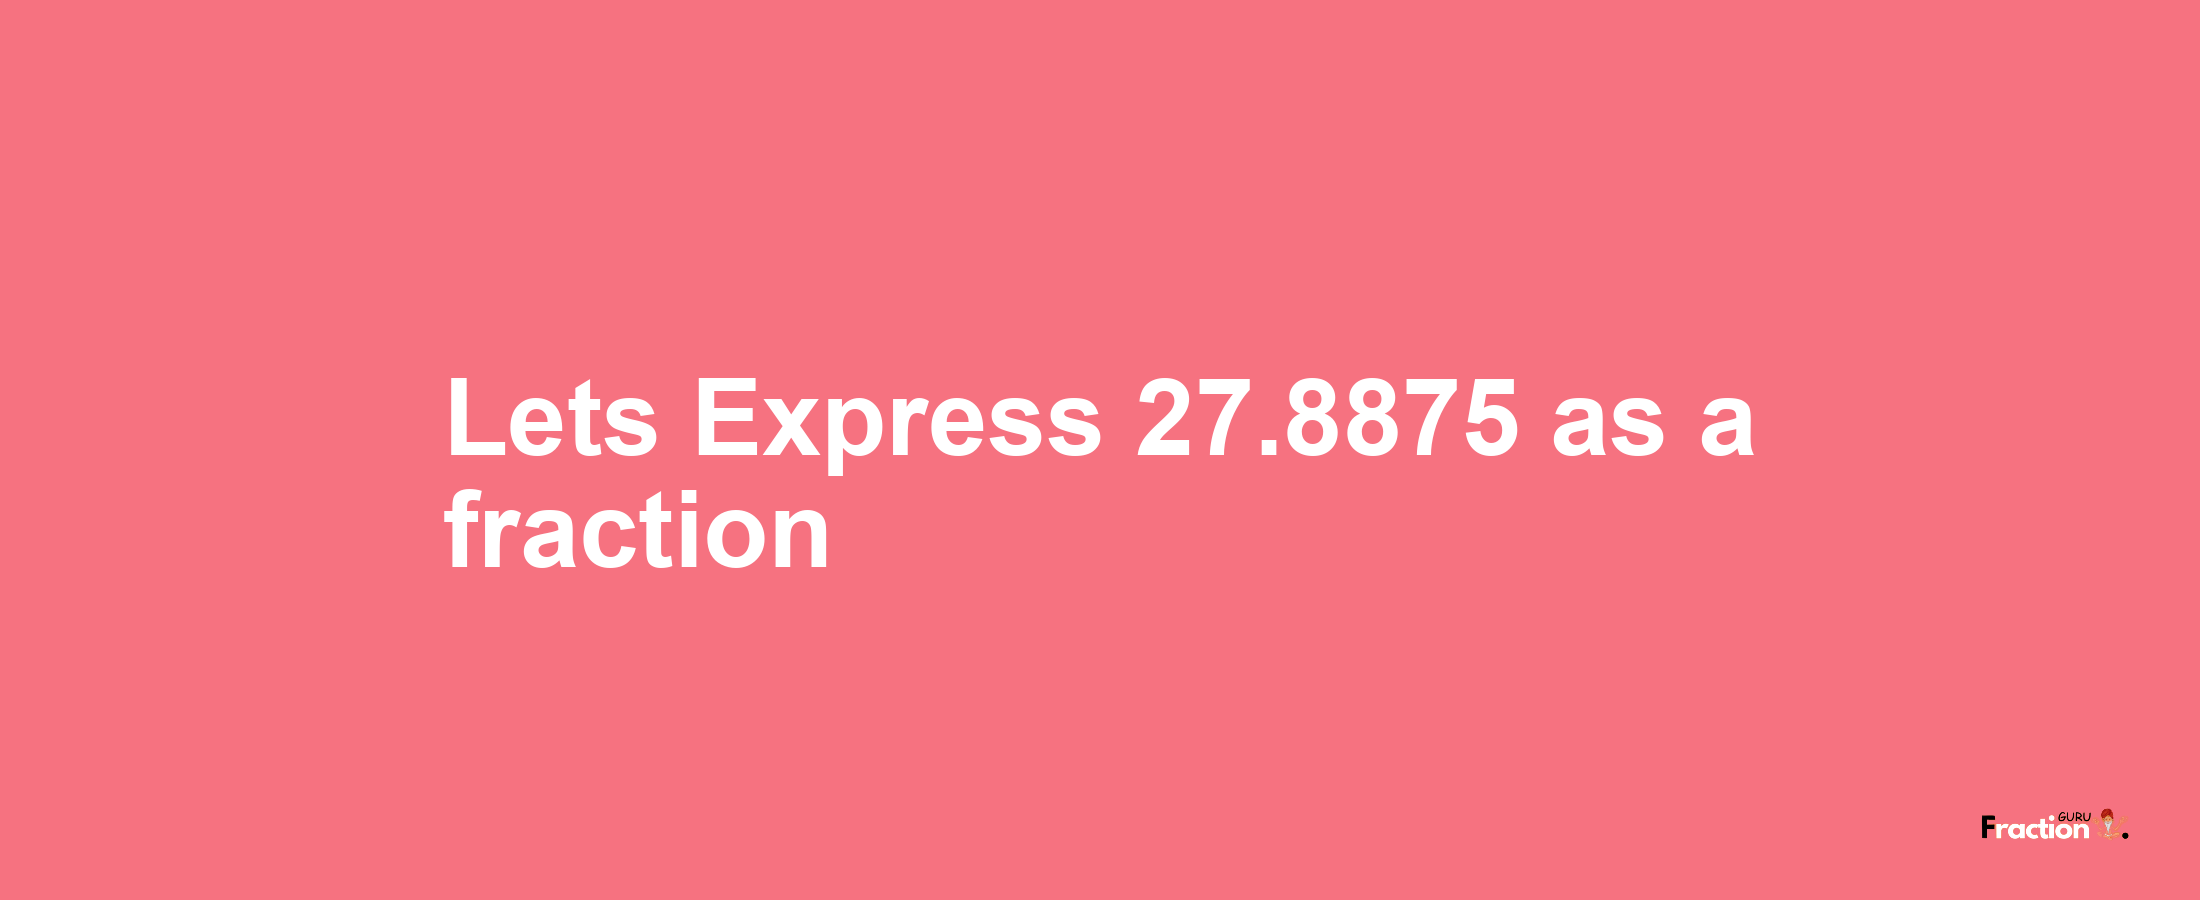 Lets Express 27.8875 as afraction